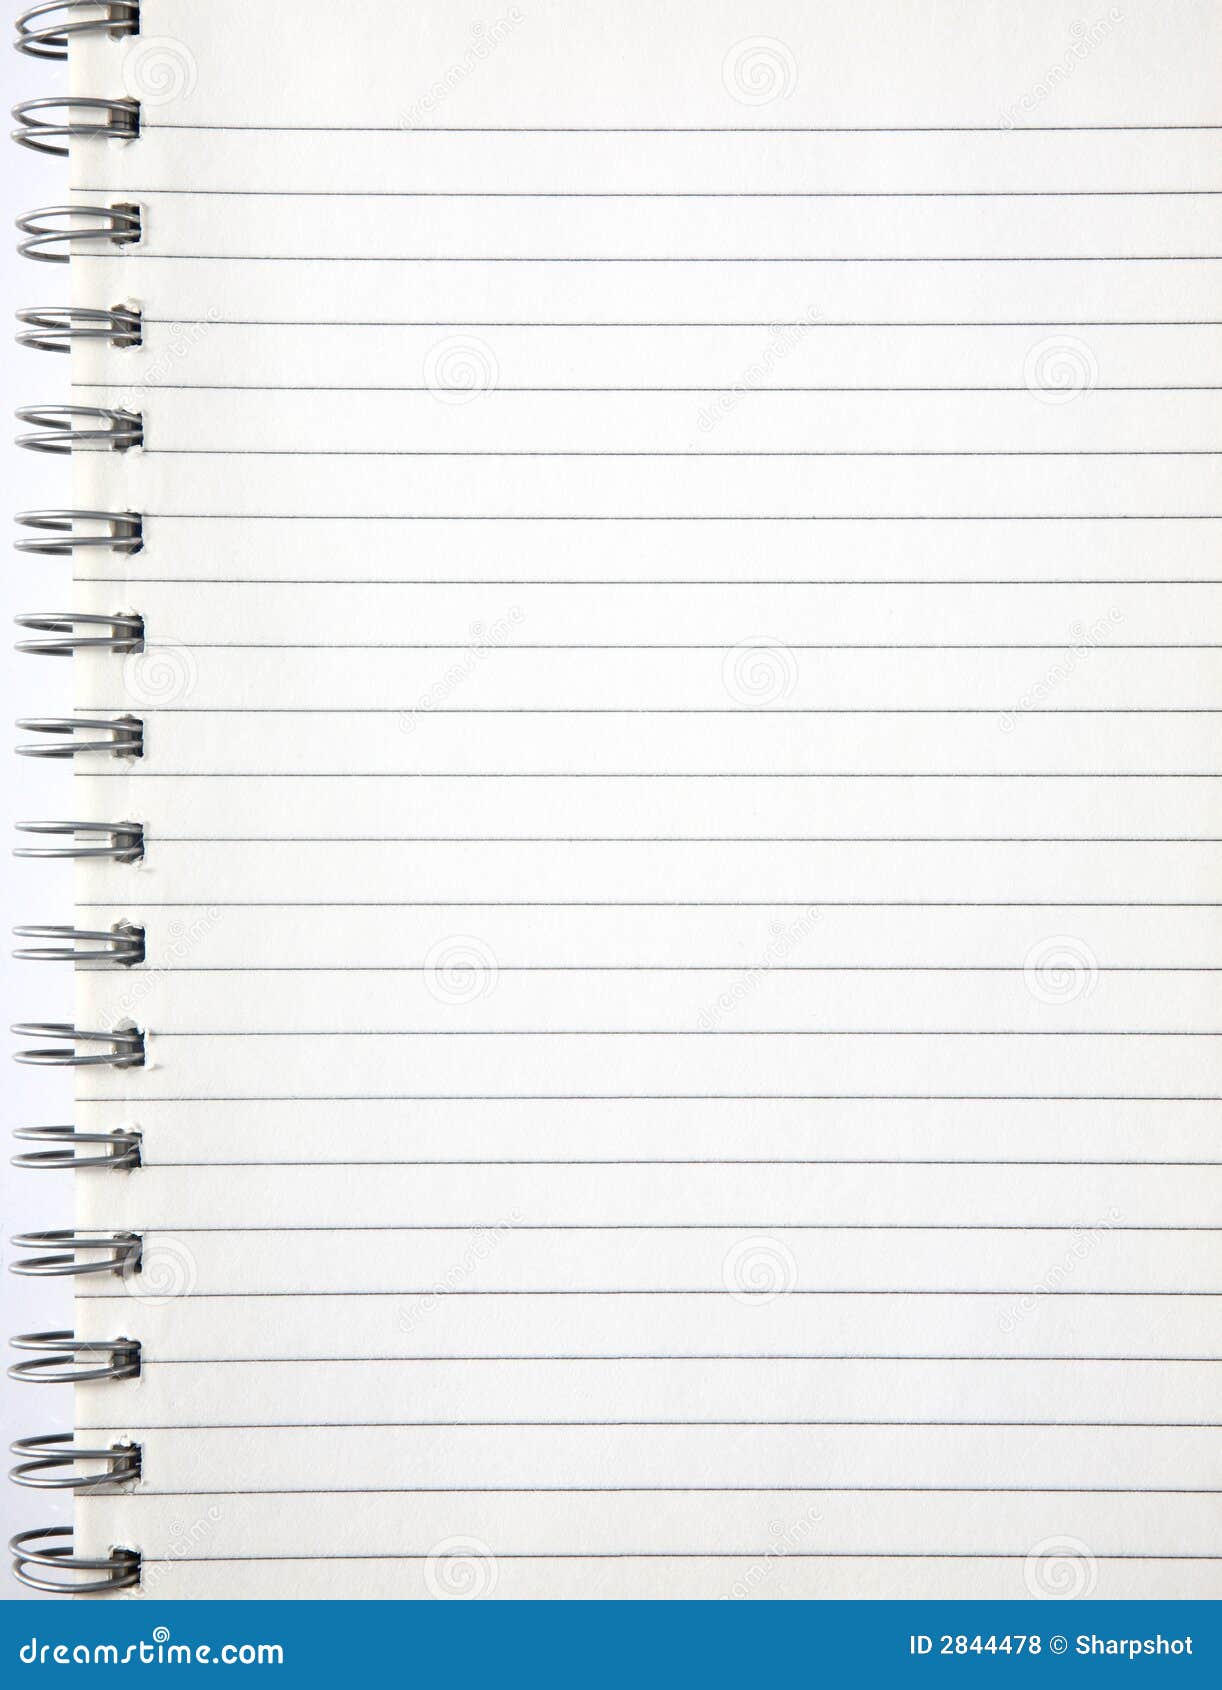 A Blank Page of an Notebook. Stock Photo - Image of lined, background:  2844478